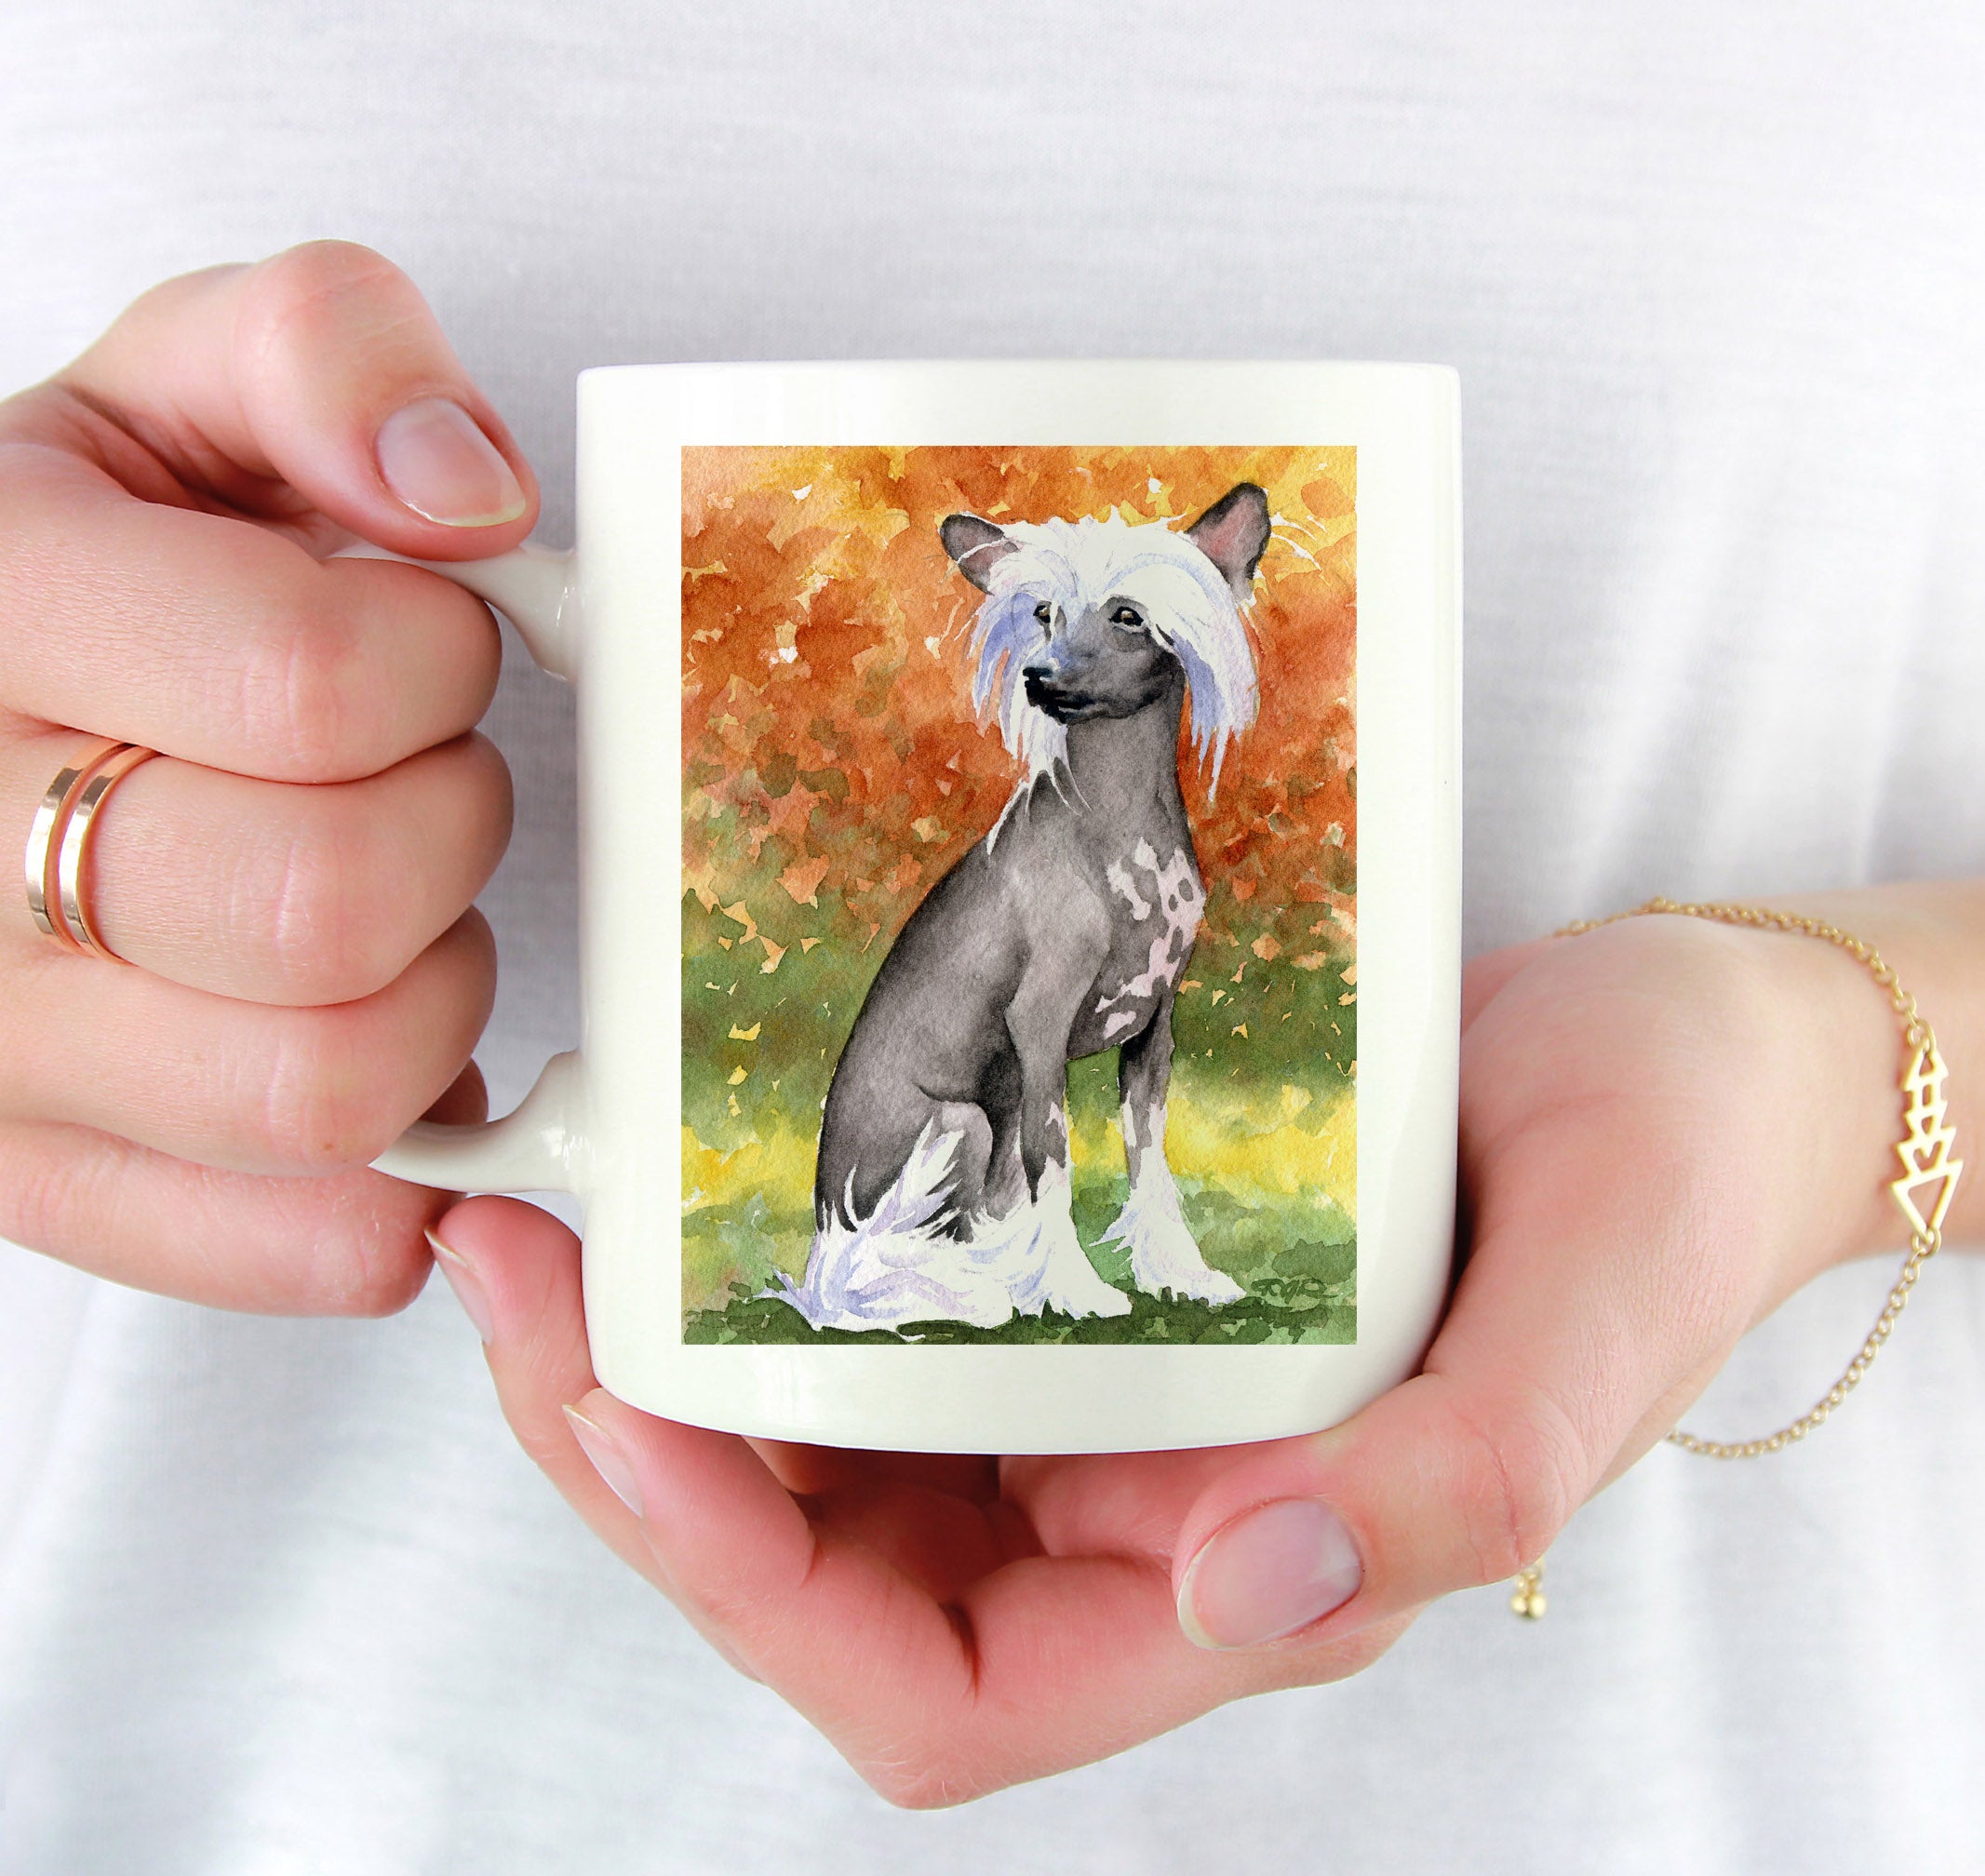 Chinese Crested Watercolor Mug Art by Artist DJ Rogers